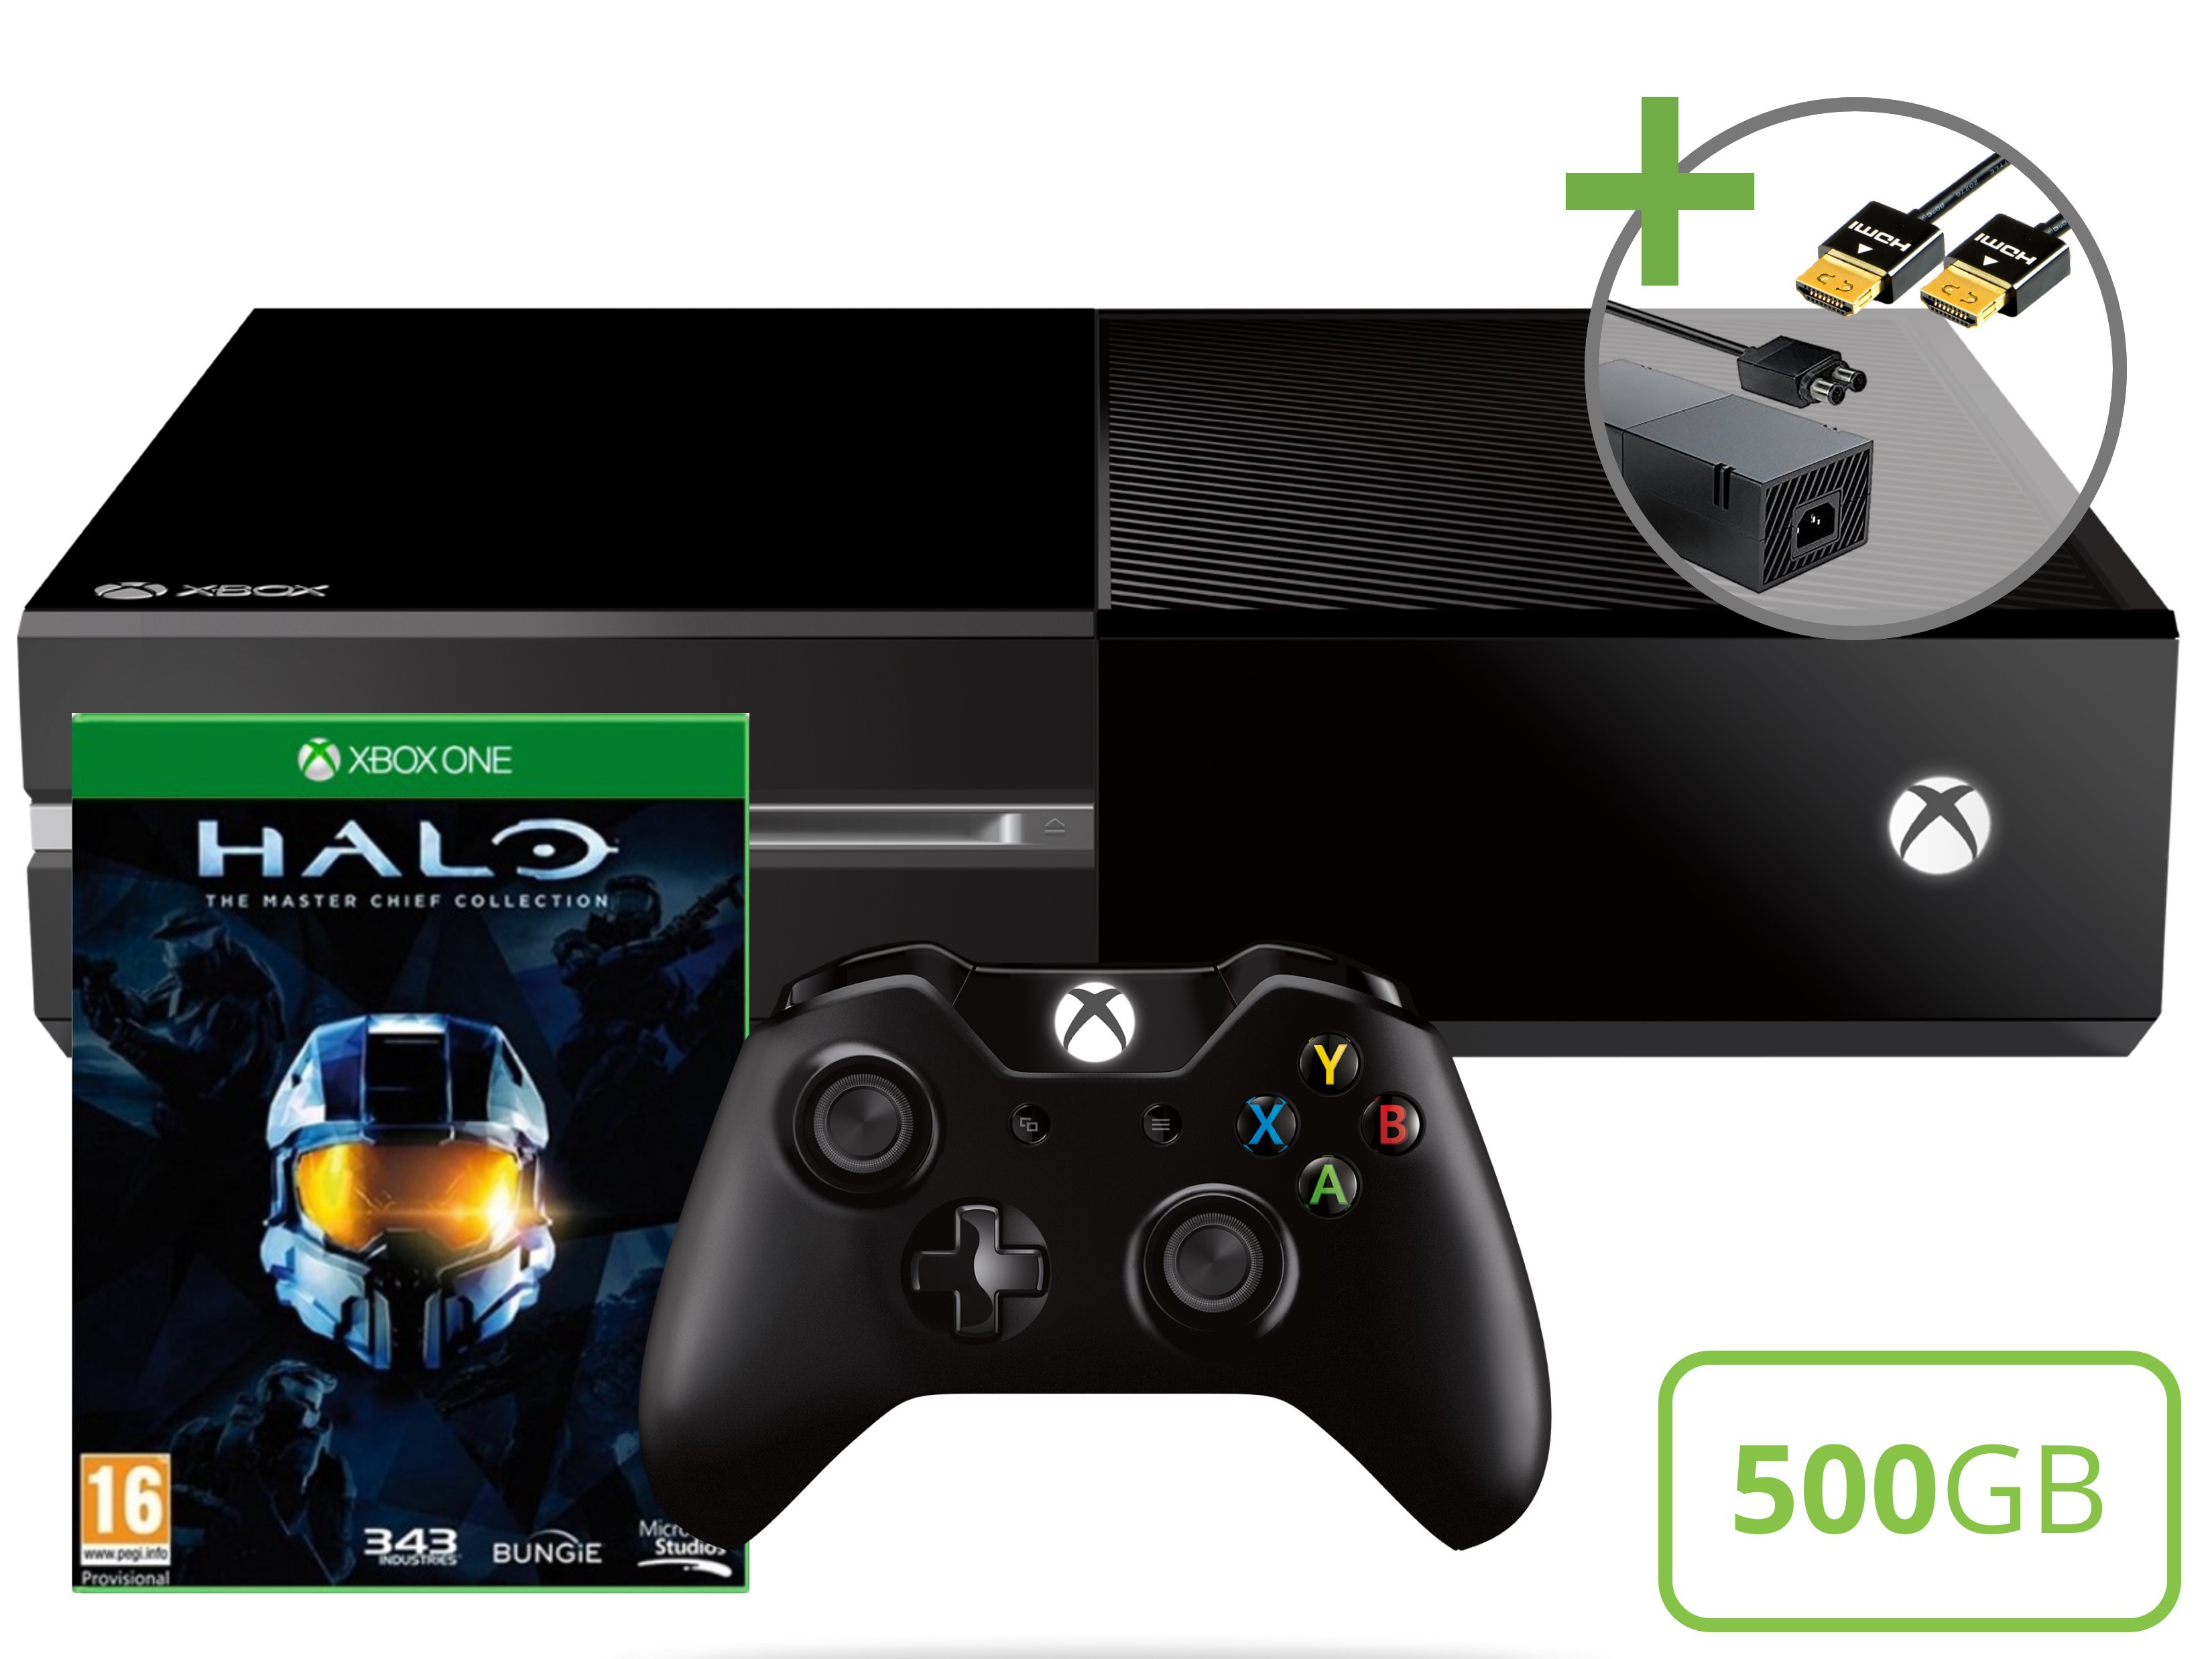 Microsoft Xbox One Starter Pack - 500GB Halo The Master Chief Collection Edition - Xbox One Hardware